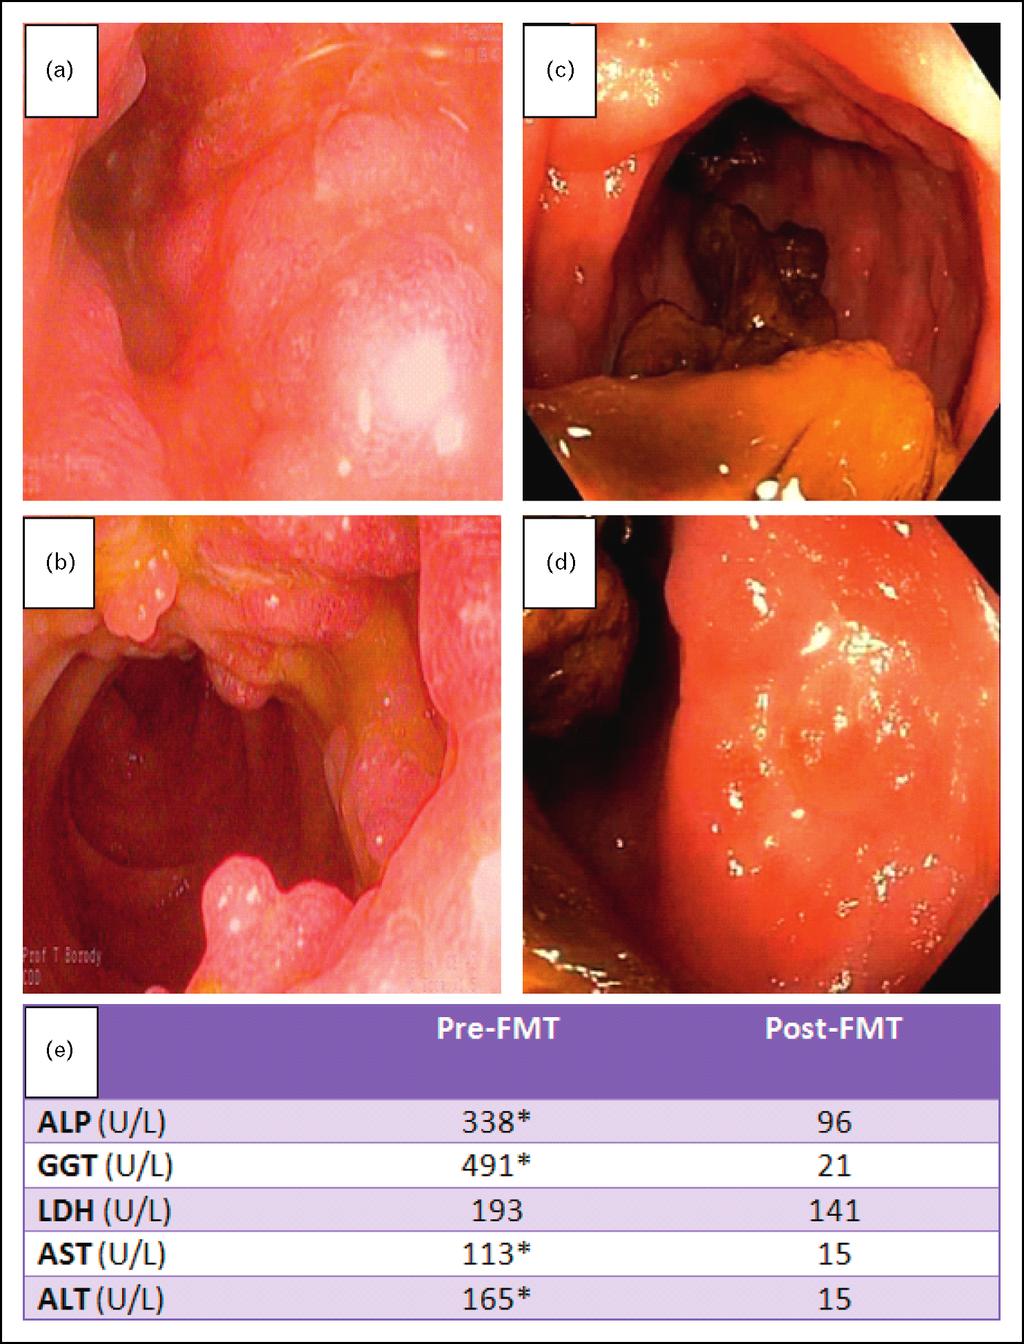 Large intestine FIGURE 1. Inflammatory bowel disease with concurrent sclerosing cholangitis pre and post-fmt.